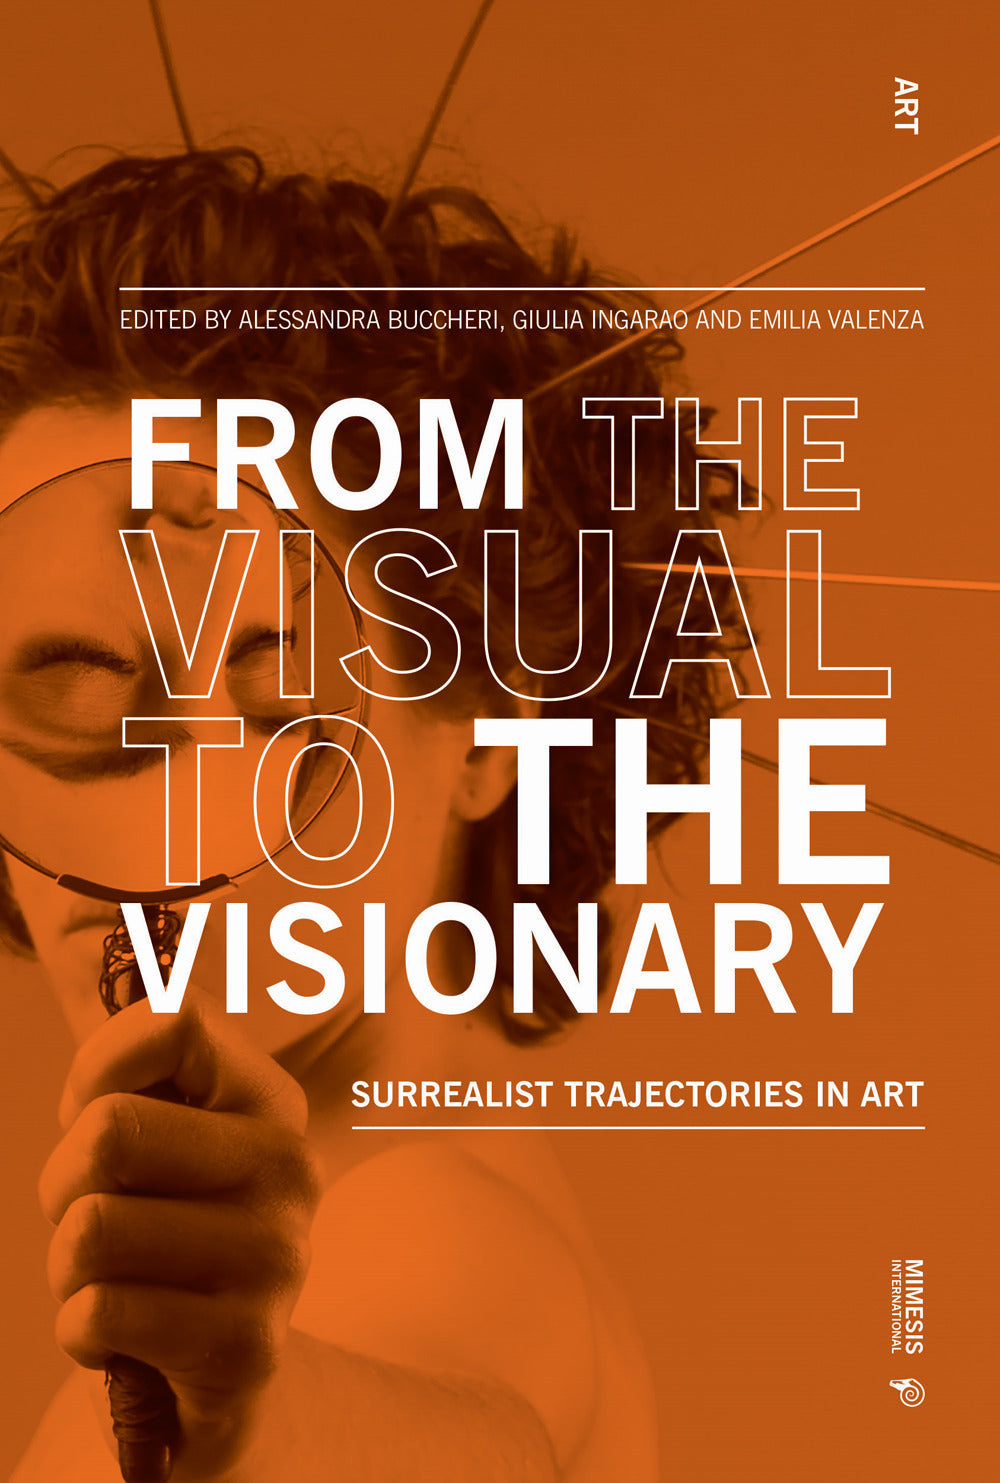 From the visual to the visionary. Surrealist trajectories in art